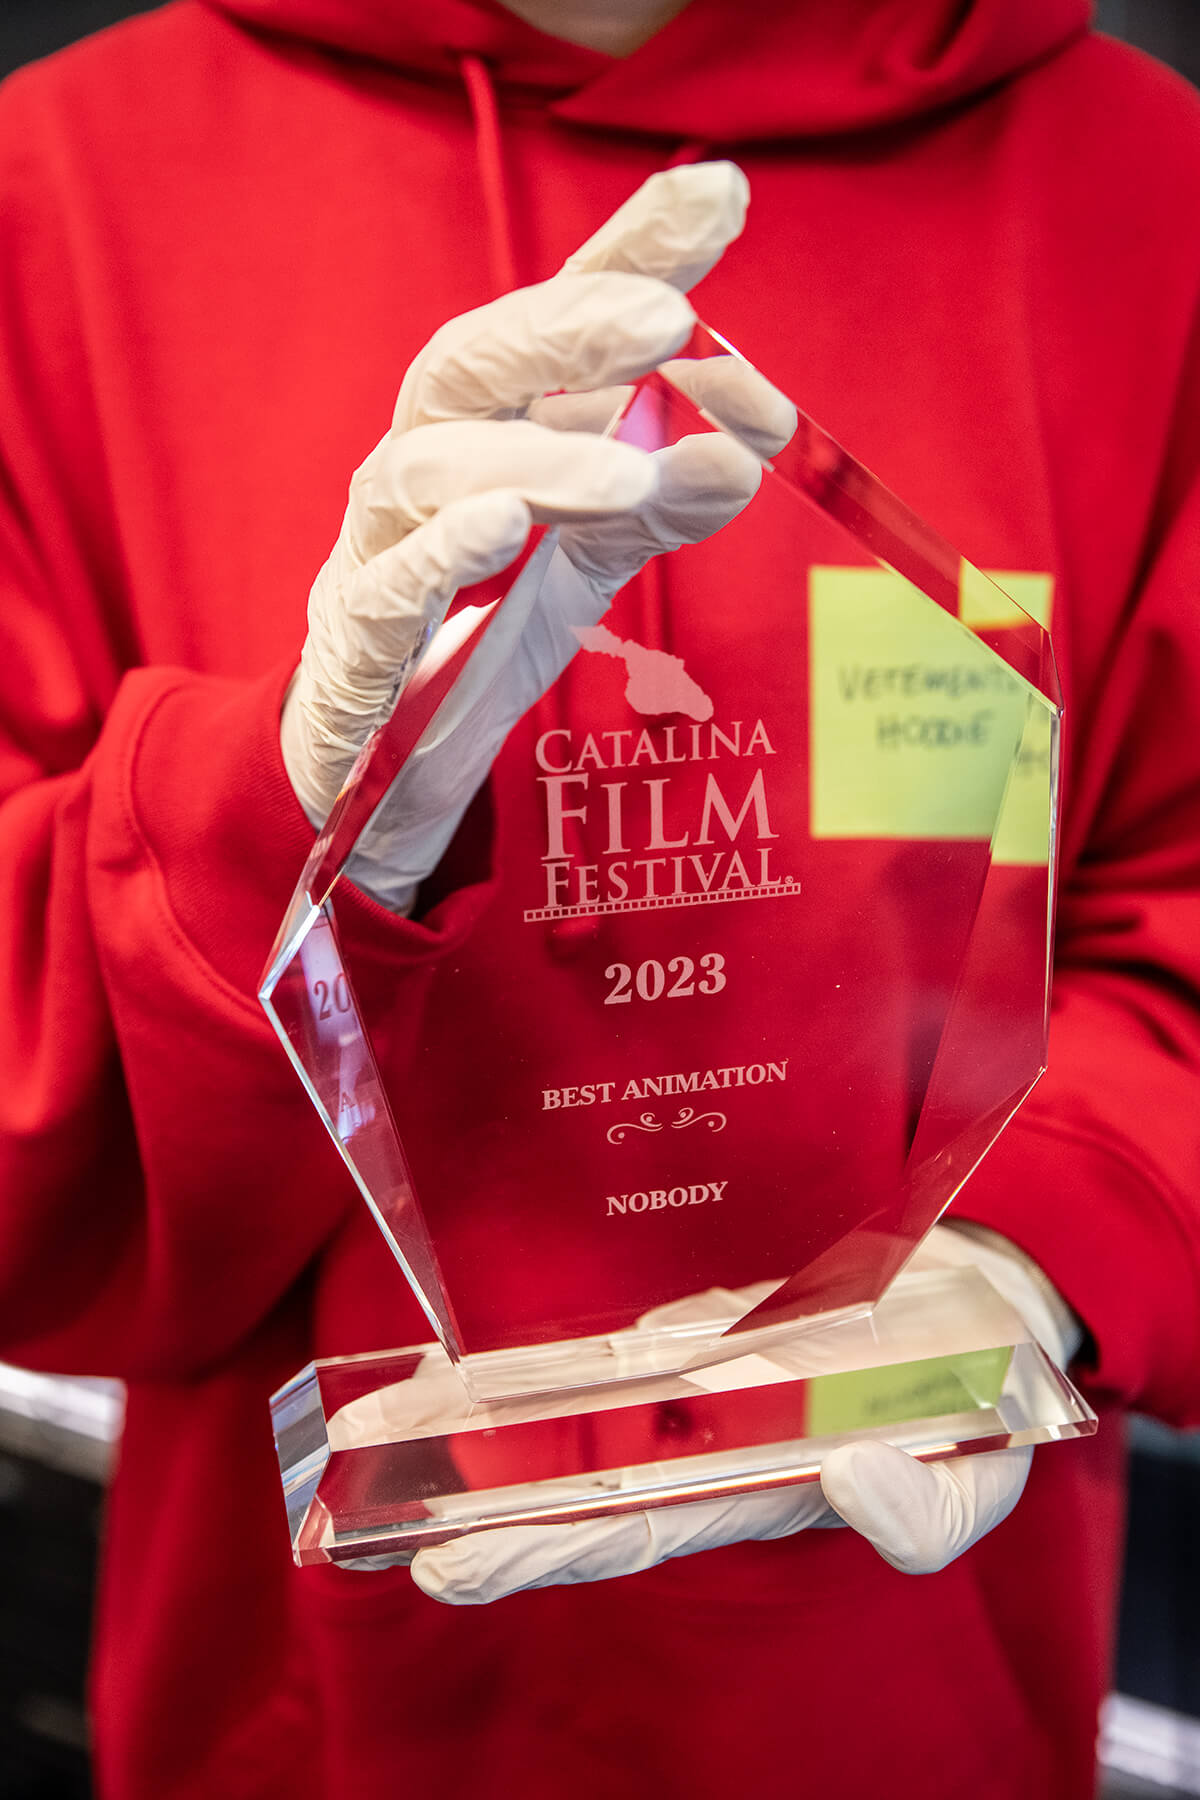 Mingyuan Li holds her clear, pointed trophy for “Best Animation” for her short film Nobody, awarded by the Catalina Film Festival.